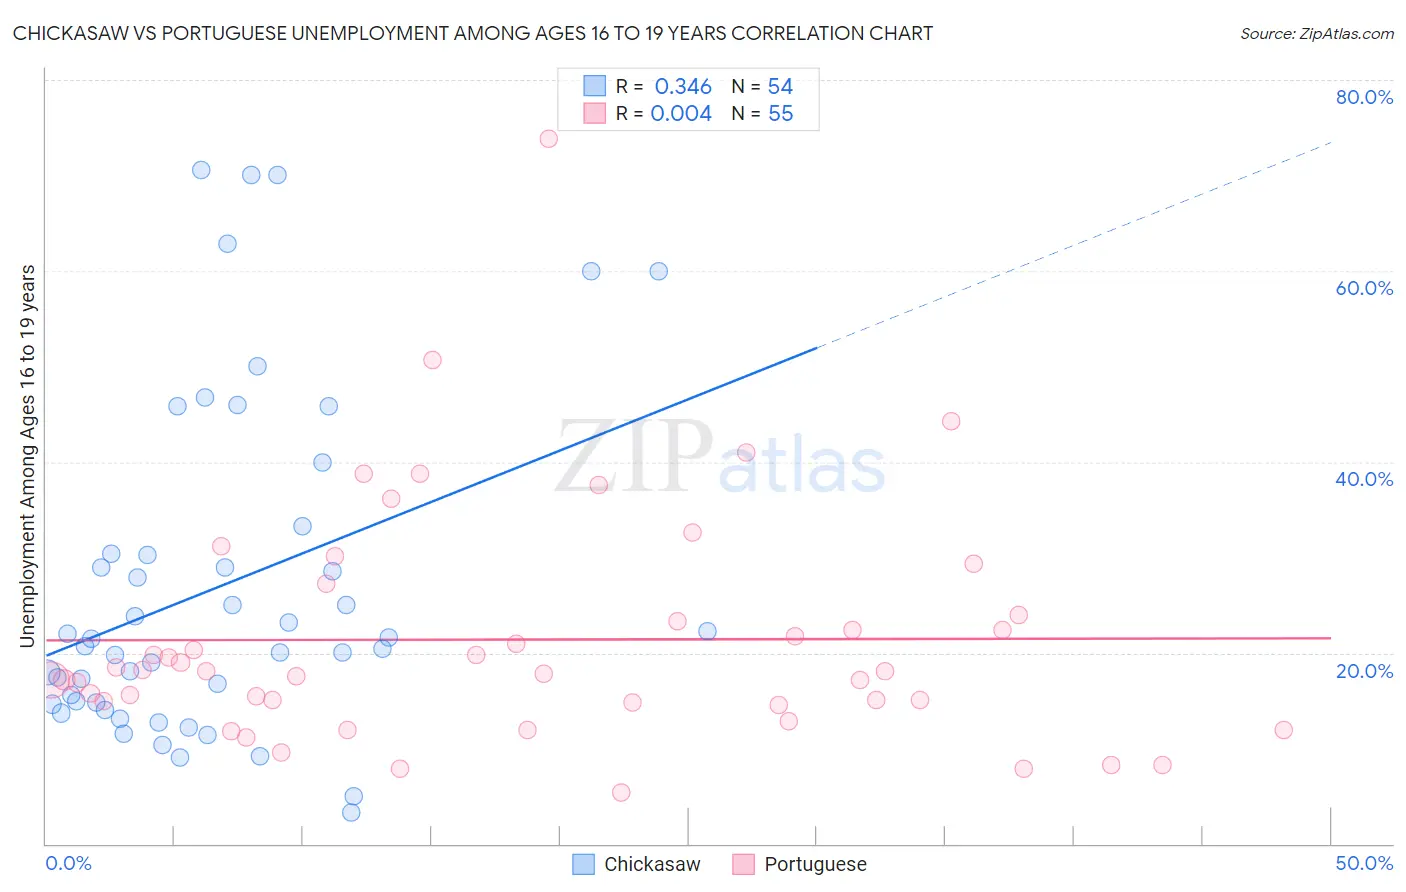 Chickasaw vs Portuguese Unemployment Among Ages 16 to 19 years